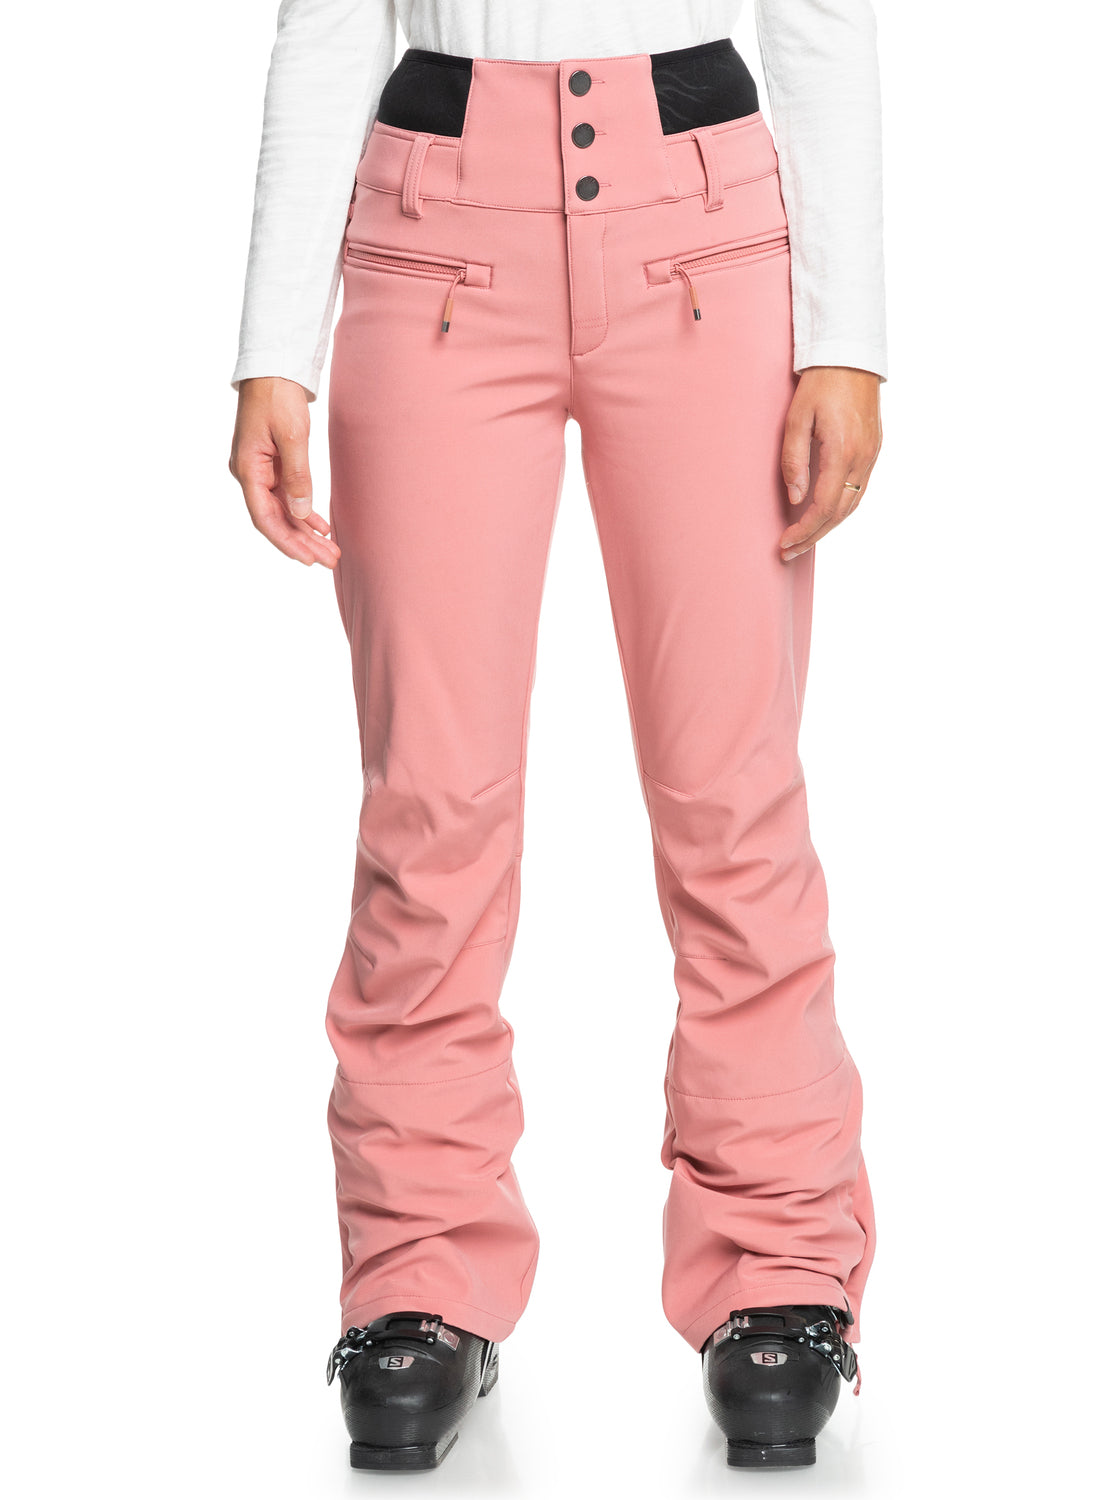 Rising High Technical Snow Pants - Dusty Rose